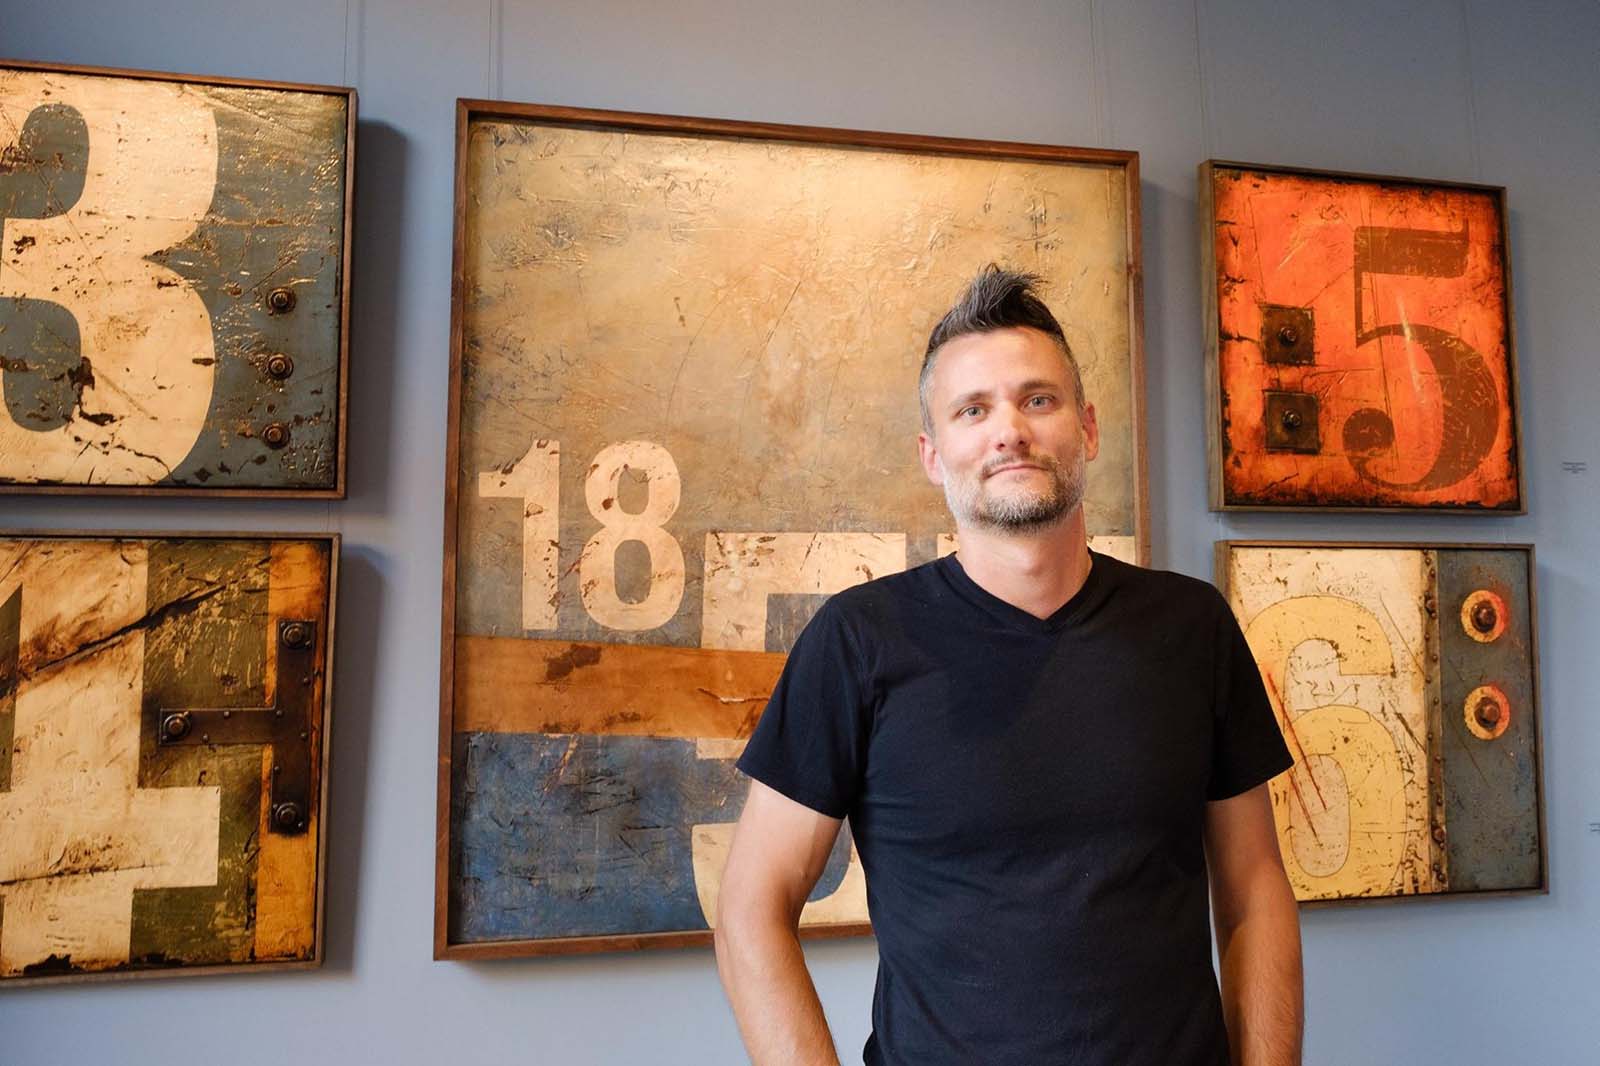 Artist Domenick Naccarato standing in front of a display of his work hanging at the Bethlehem House Gallery in Bethlehem, PA.